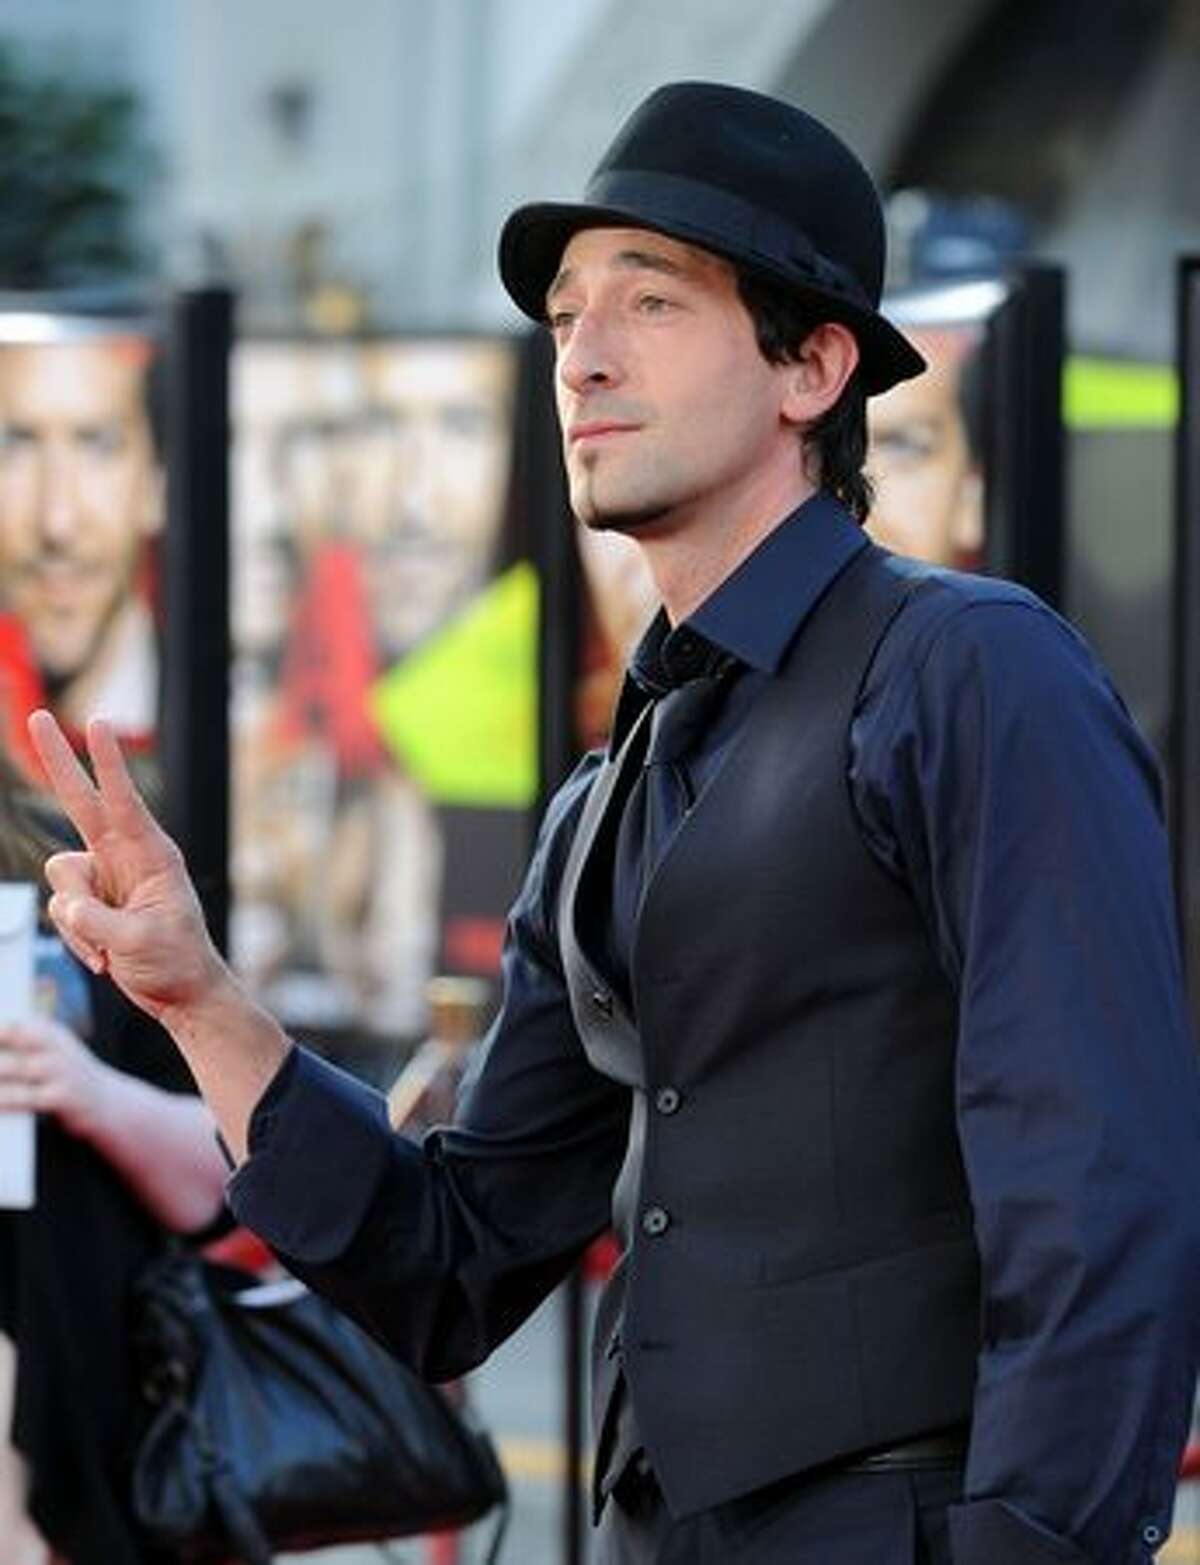 Actor Adrien Brody arrives at the premiere of 20th Century Fox's "The A-Team" held at Grauman's Chinese Theatre.